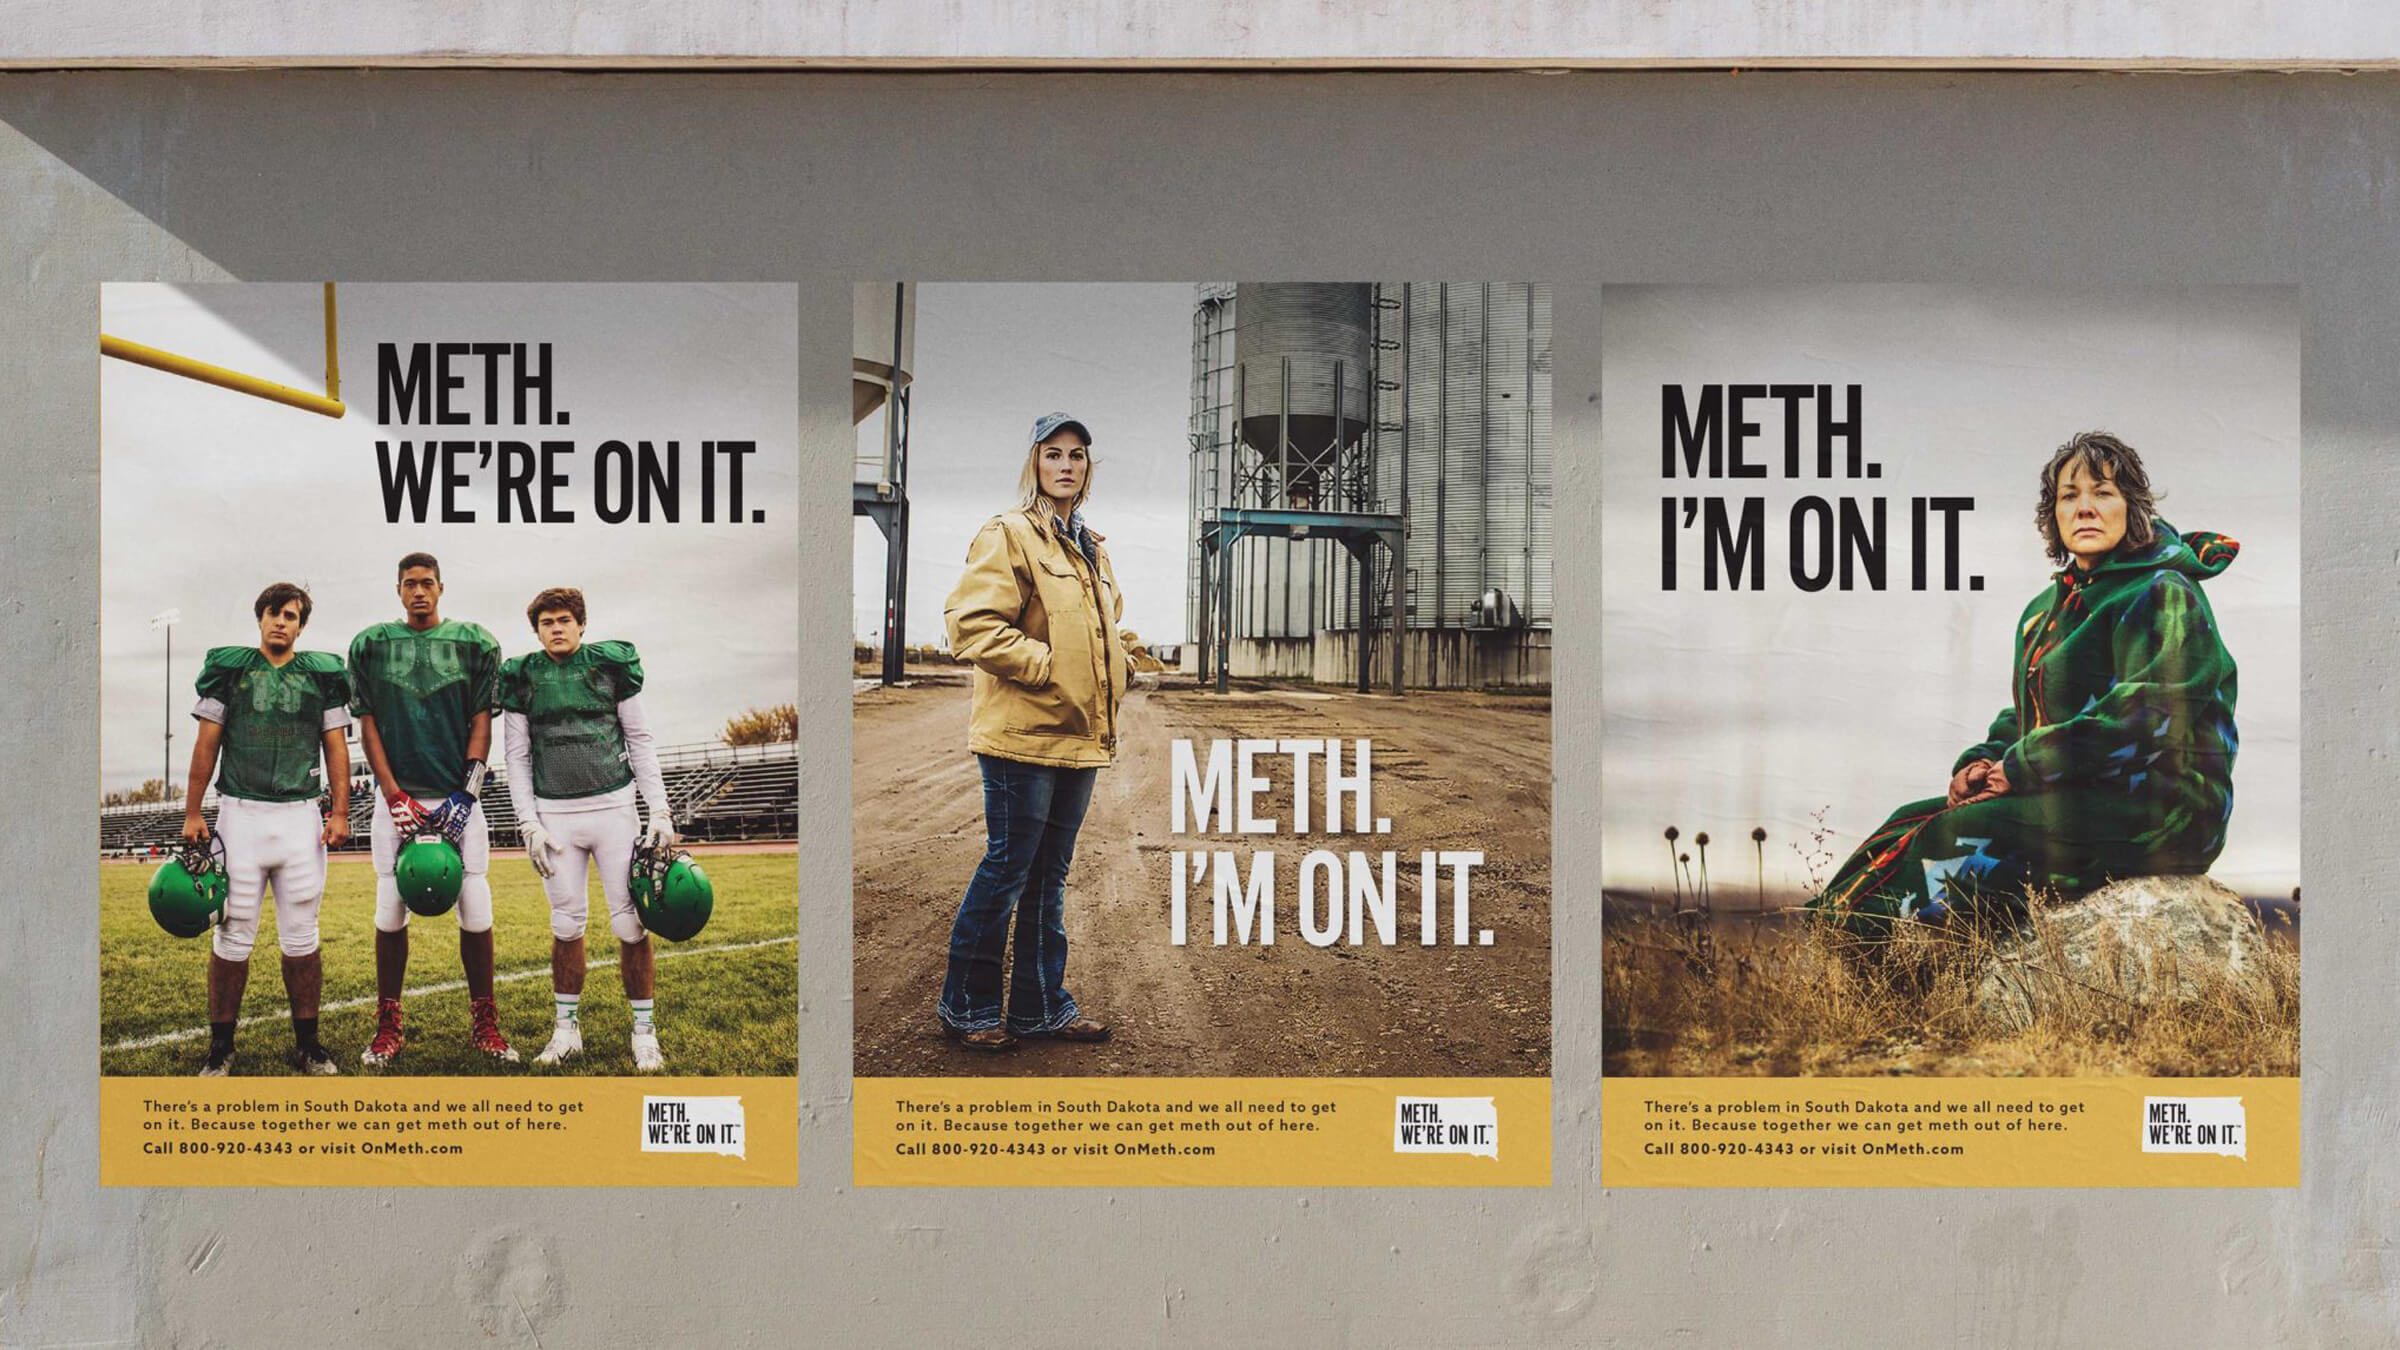 South Dakota Meth We're On It ad campaign posters